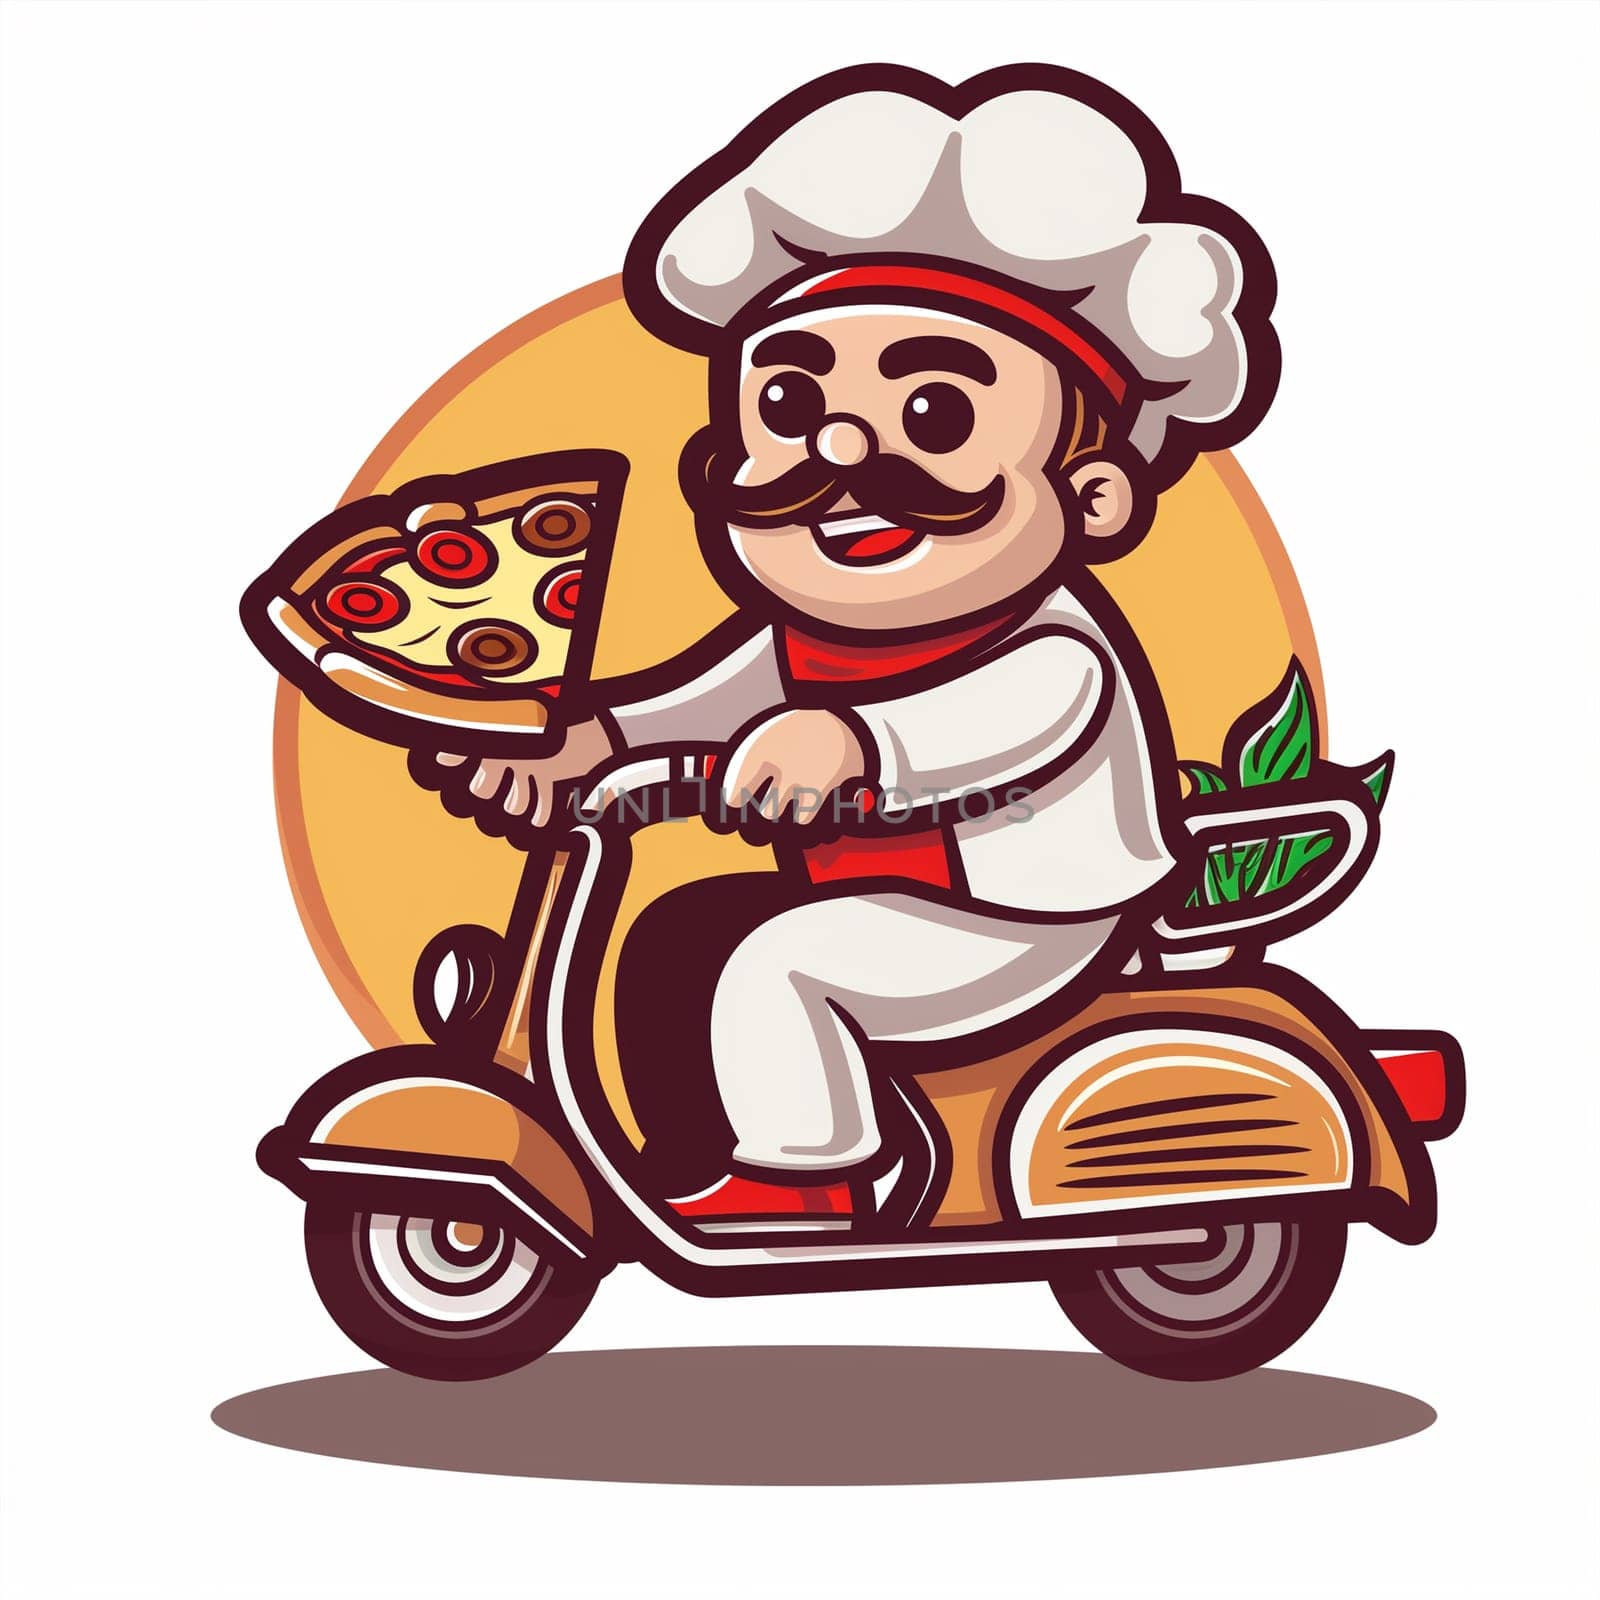 Man on Scooter Holding Pizza by Sd28DimoN_1976